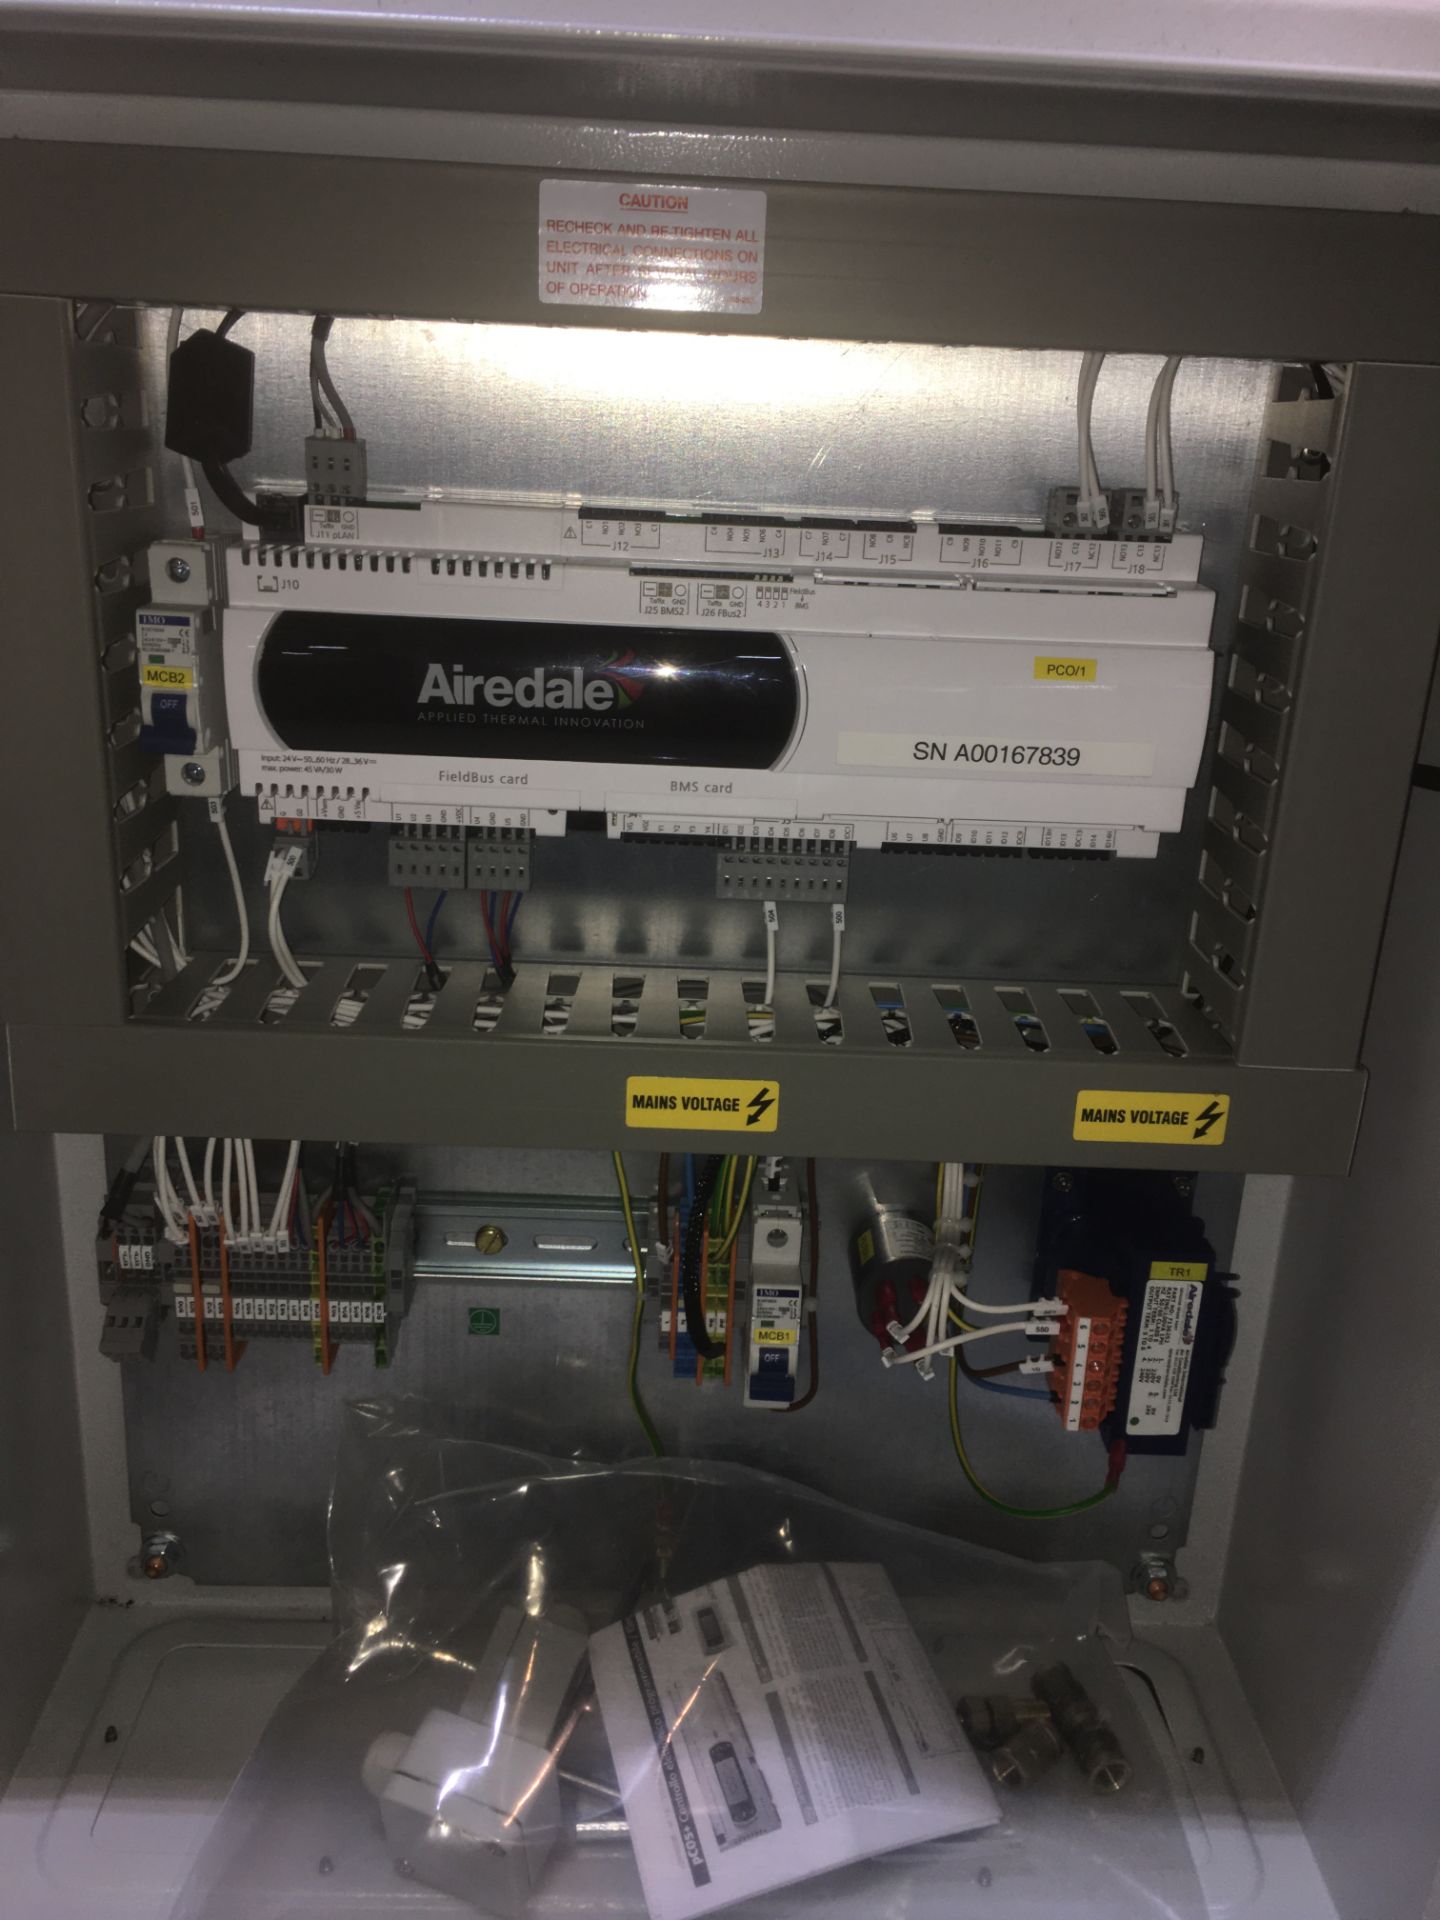 Schneider Electric A-868 Control Panel Enclosure W/ Airedale Sequence Panel - Image 2 of 7